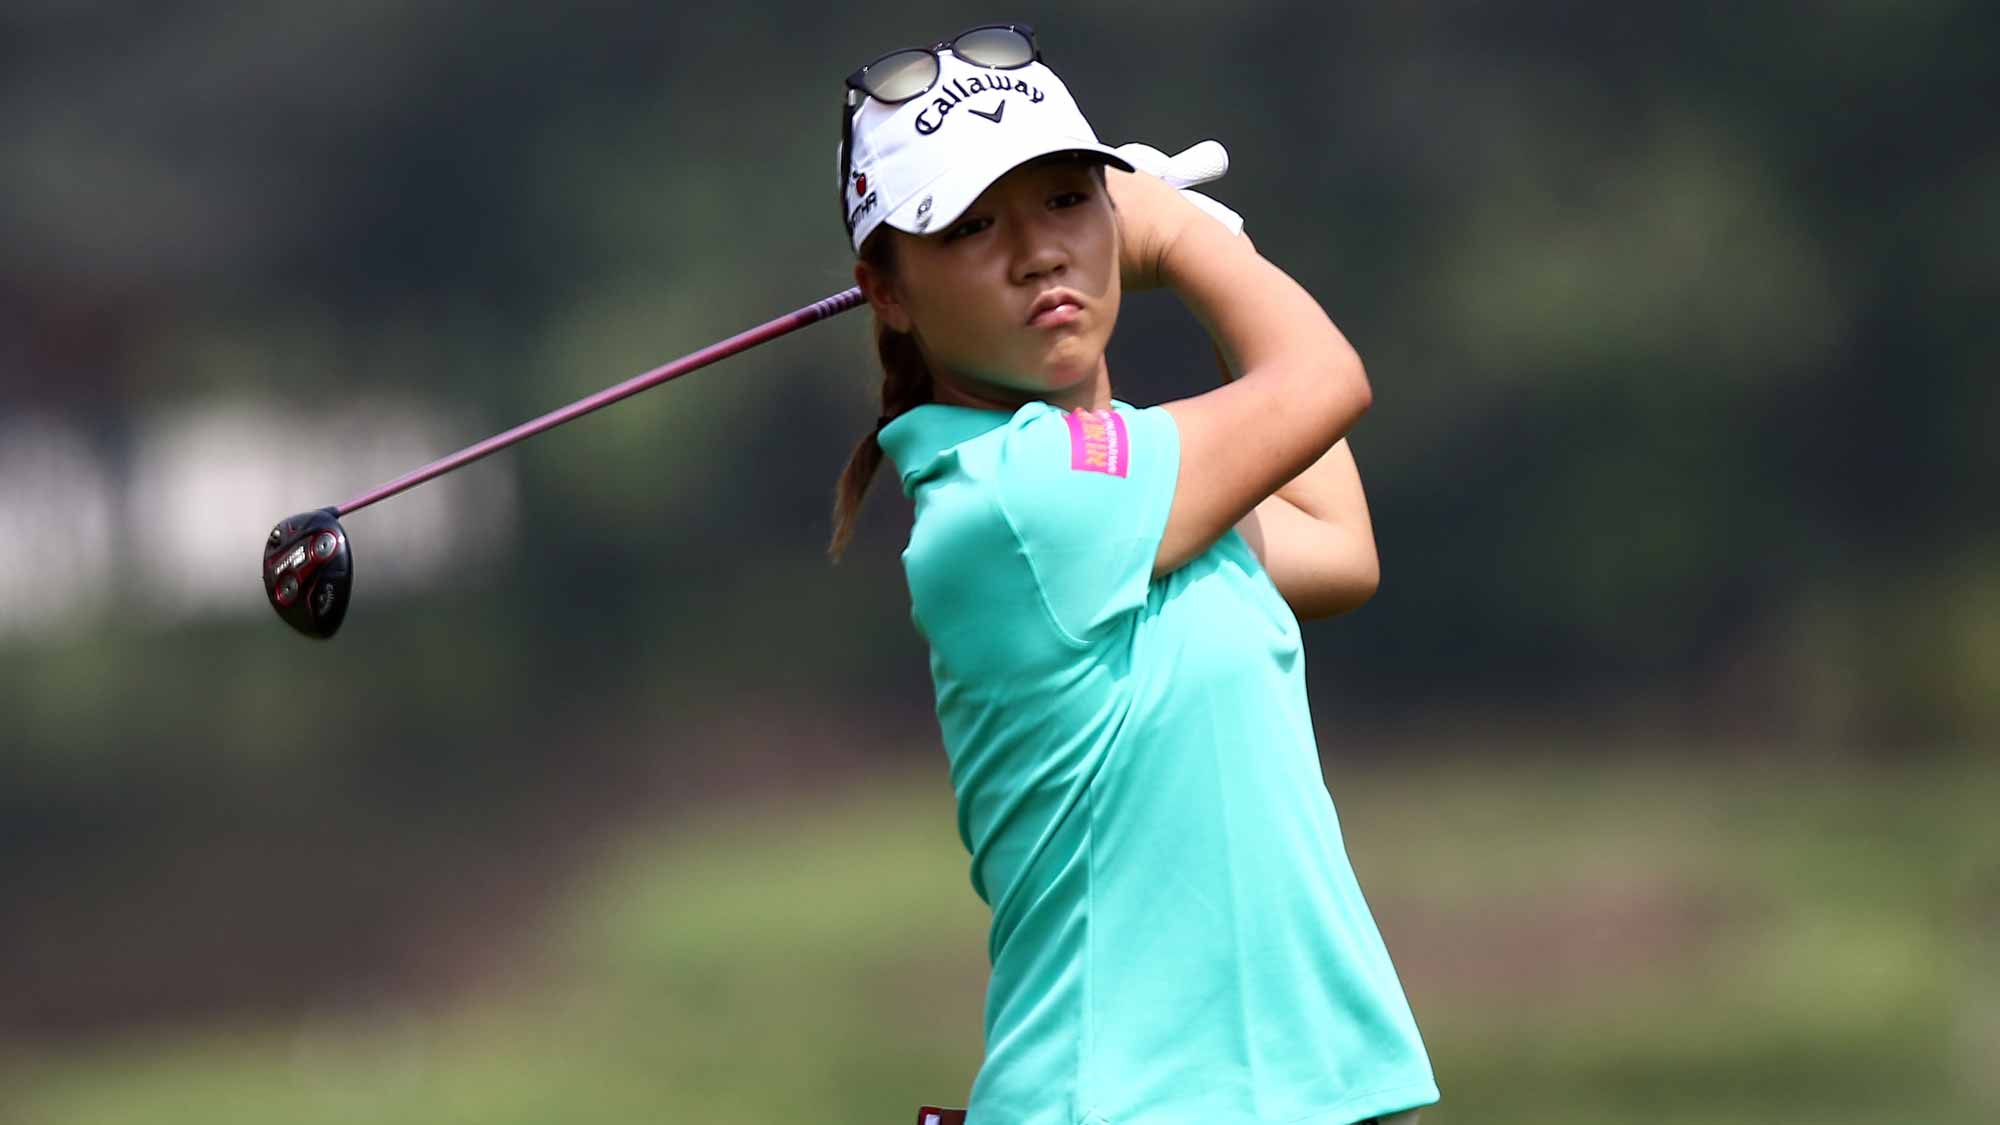 Lydia Ko of New Zealand plays her 2nd shot on the 4th hole during round one of the Sime Darby LPGA Tour at Kuala Lumpur Golf & Country Club